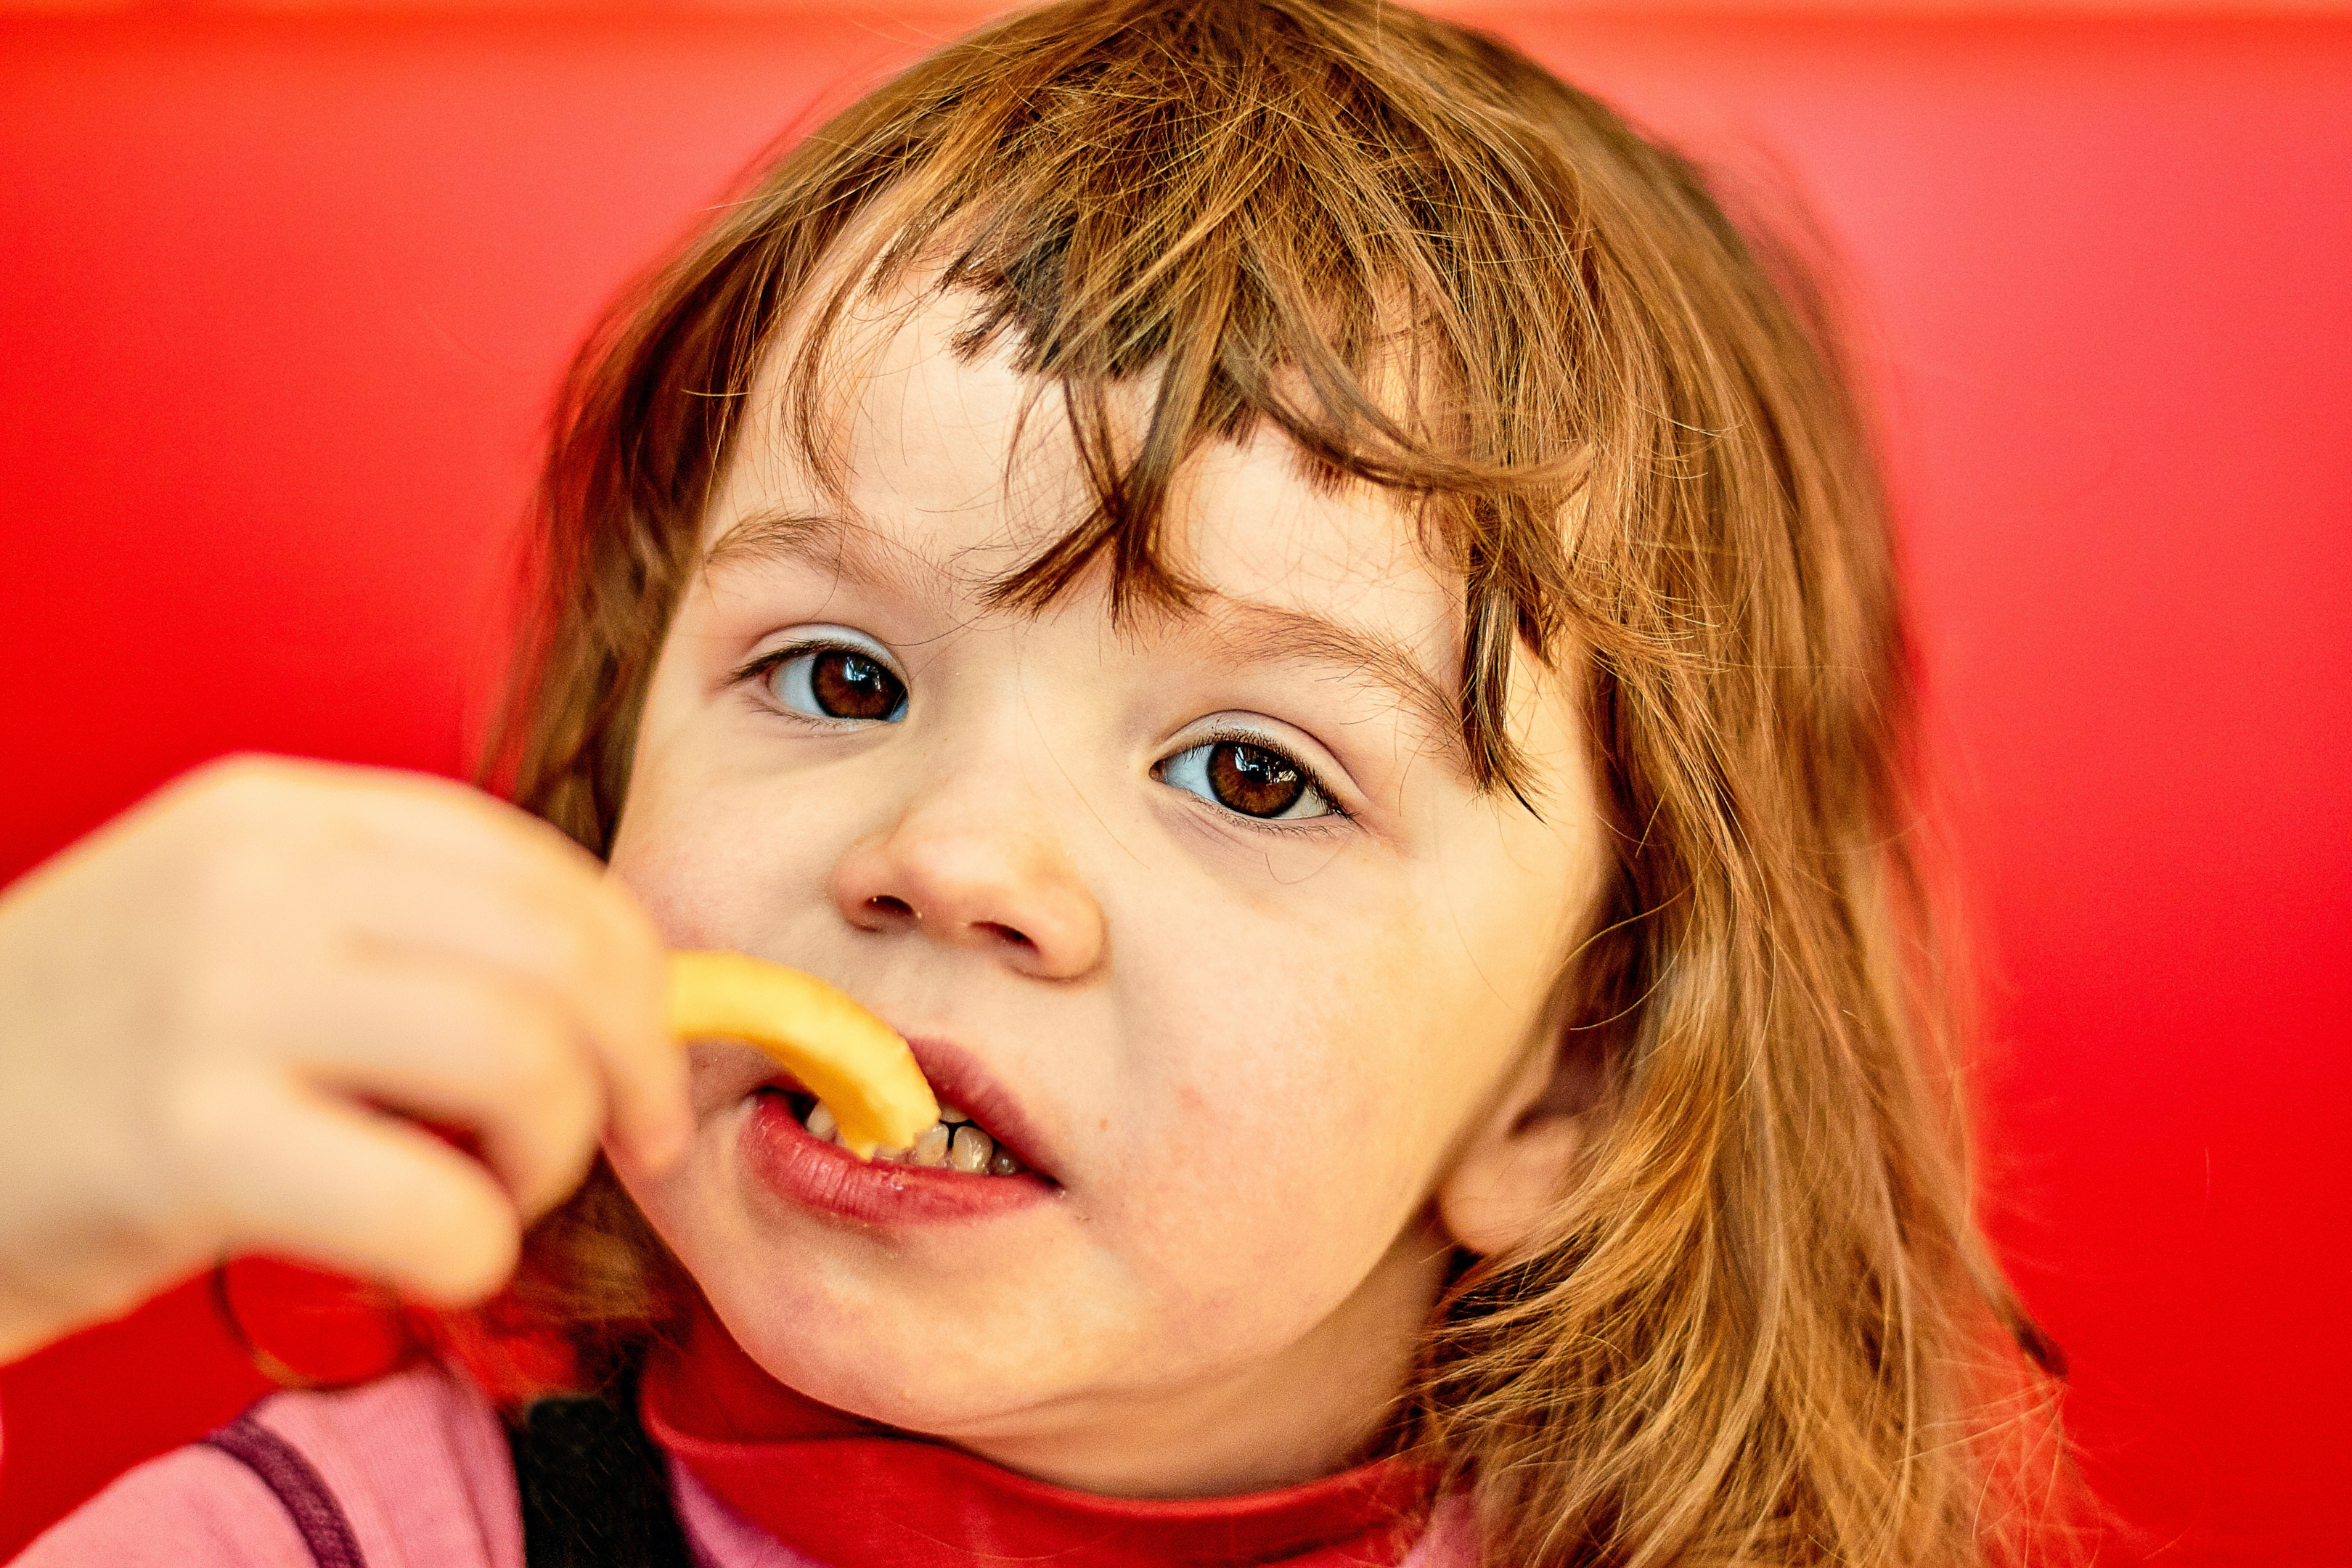  close-up shot of a child eating french fries